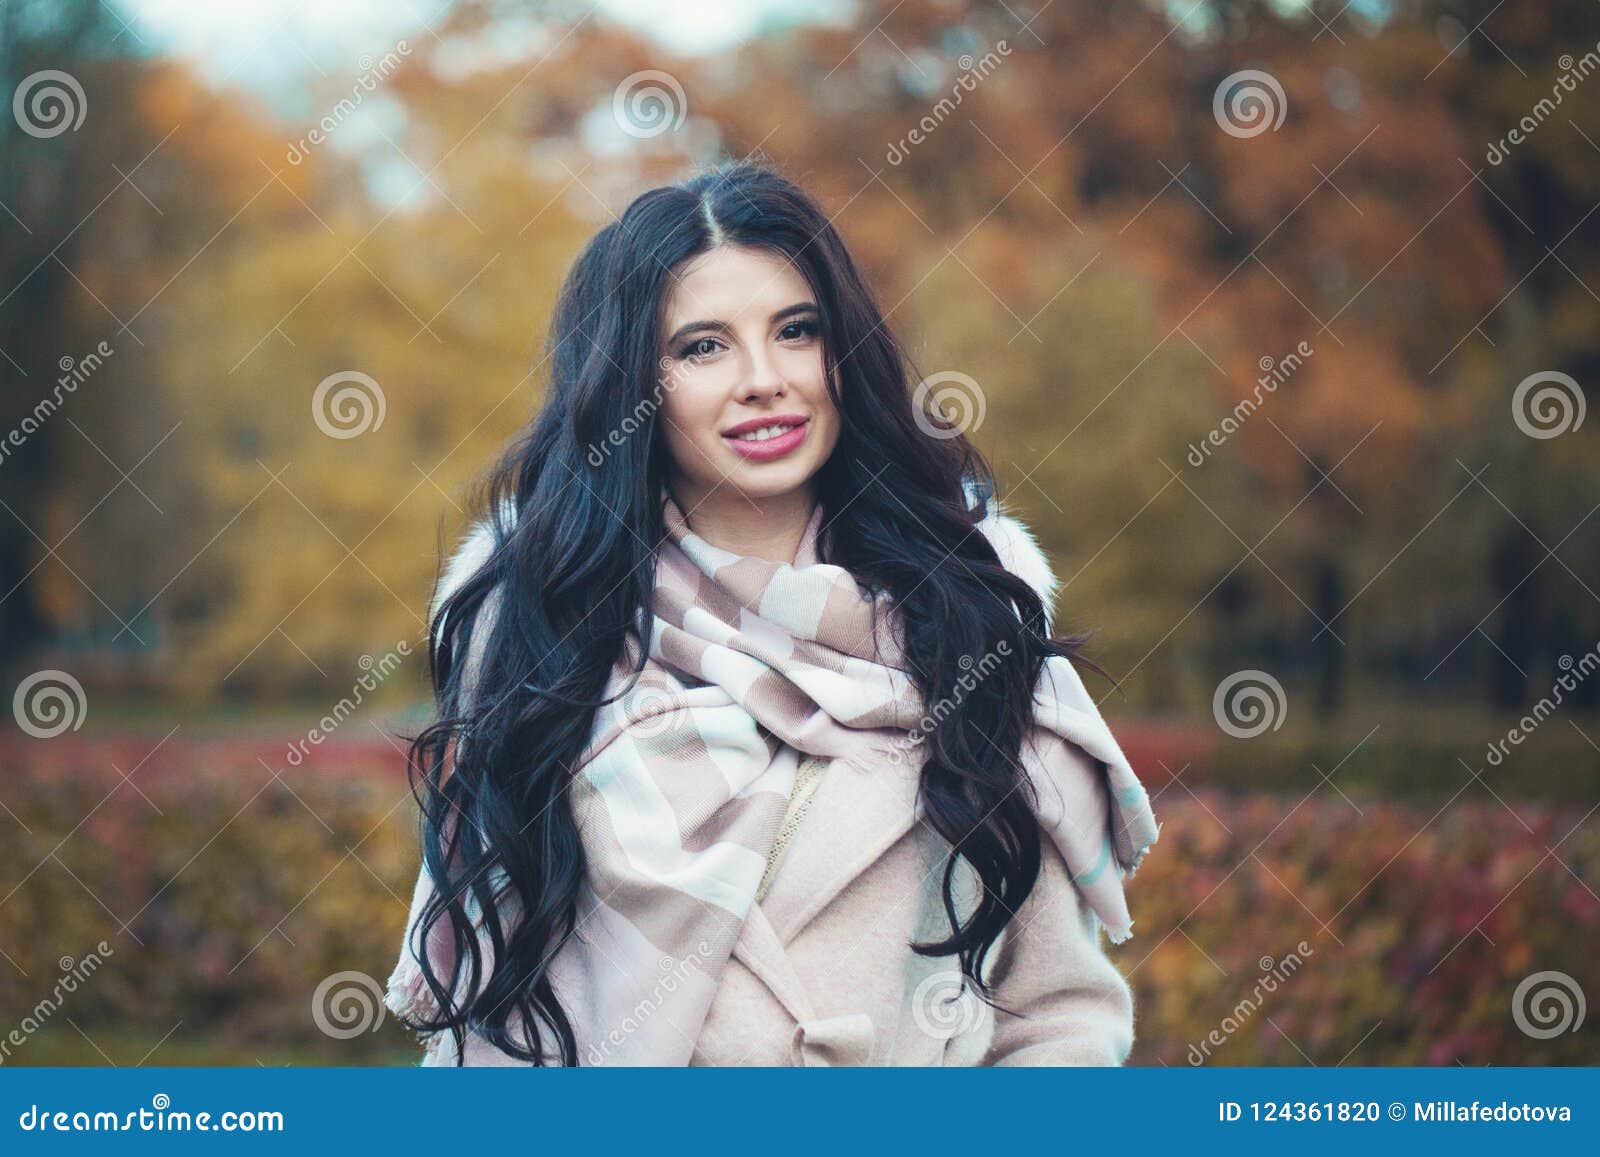 Happy Woman Brunette in Autumn Park Outdoors Stock Photo - Image of ...